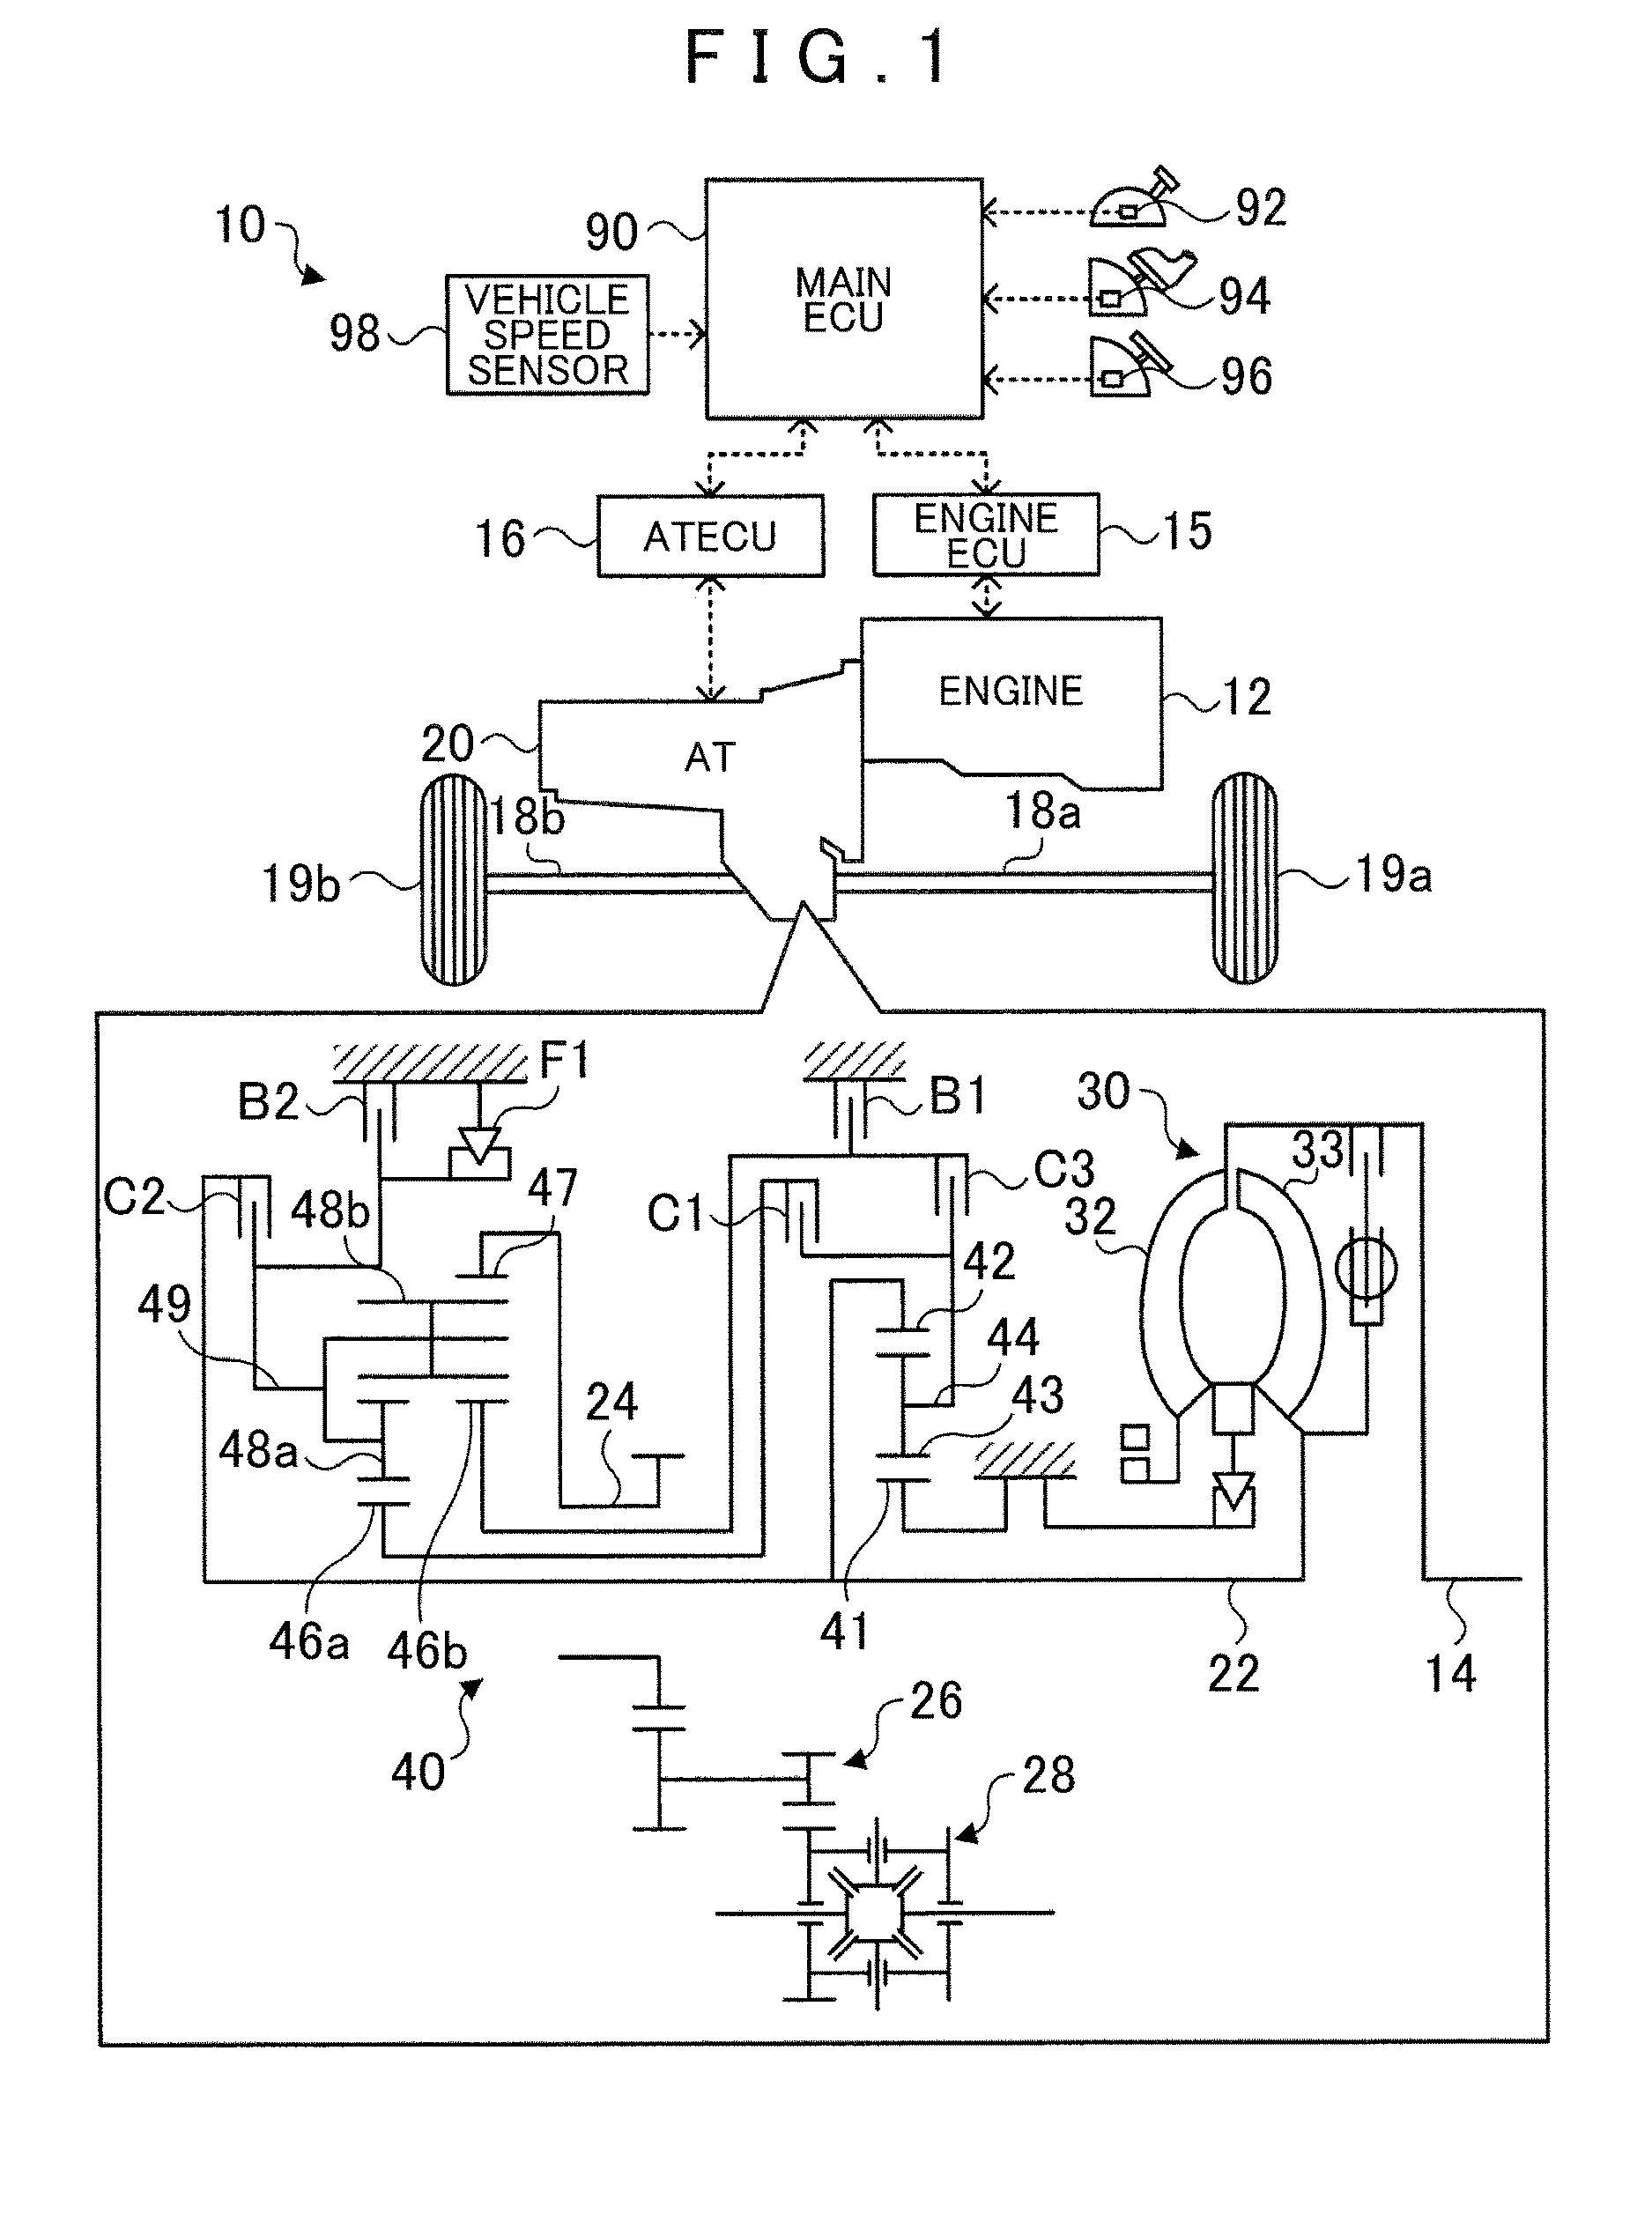 Spool valve and lubricating oil supply device